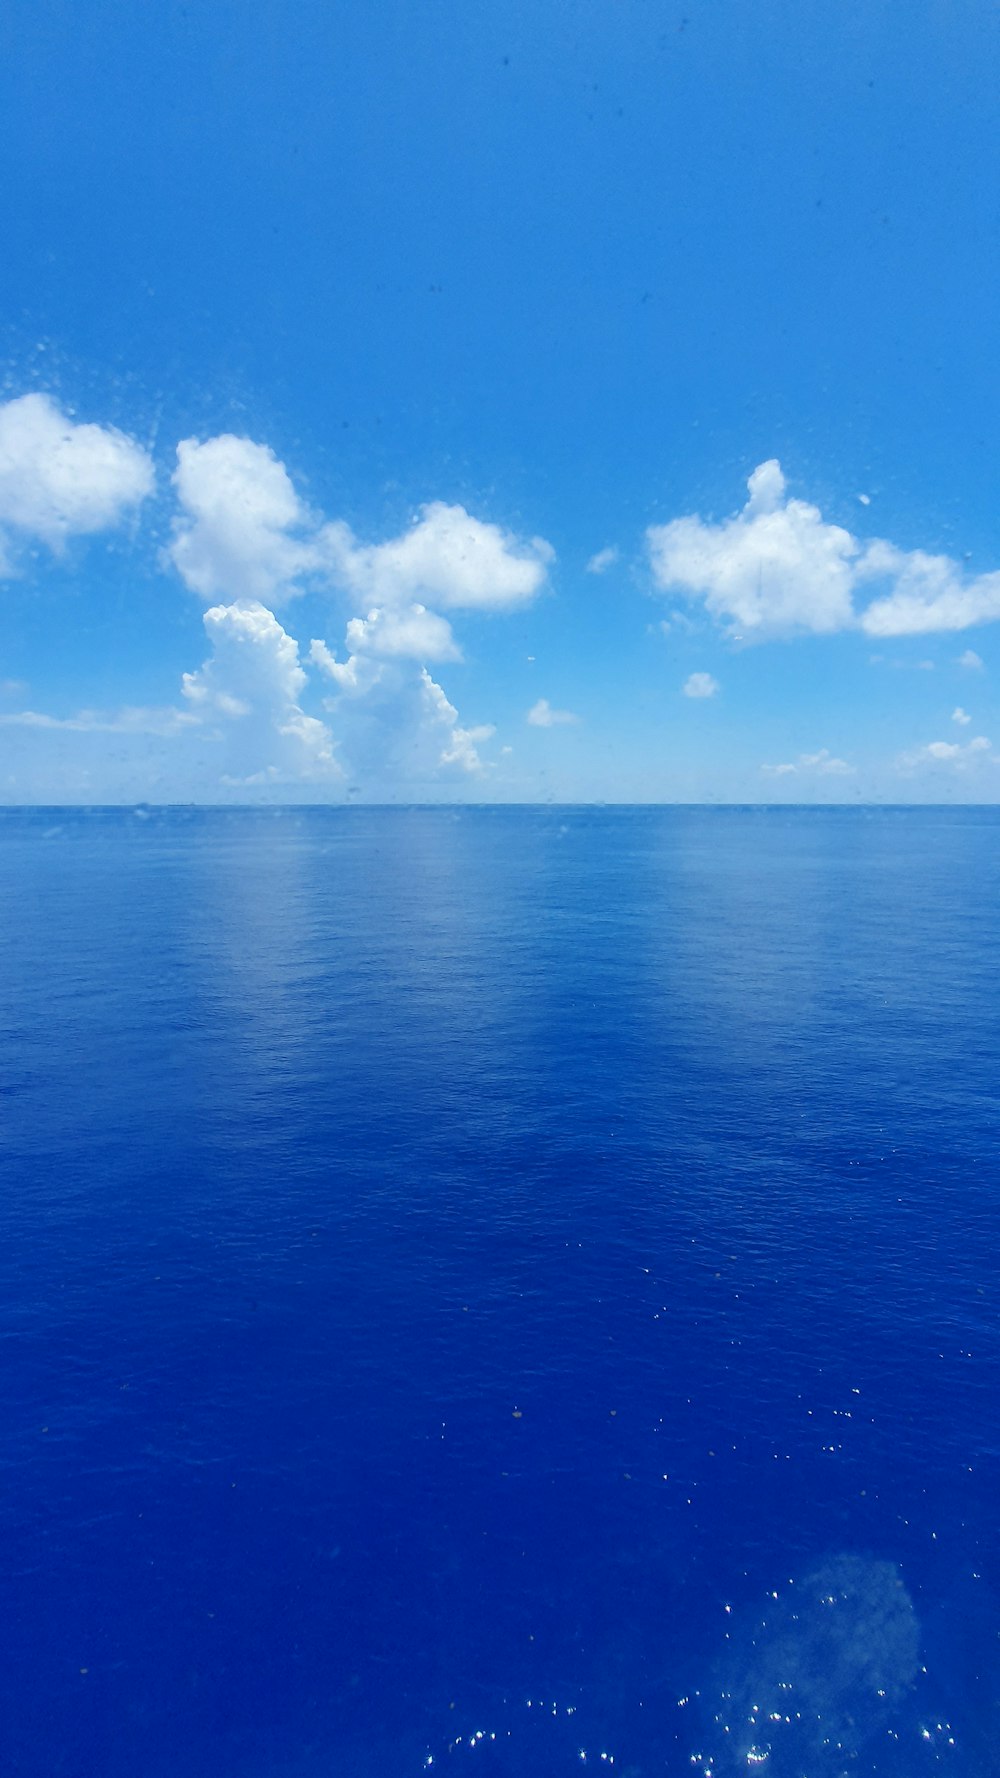 blue ocean under blue sky and white clouds during daytime